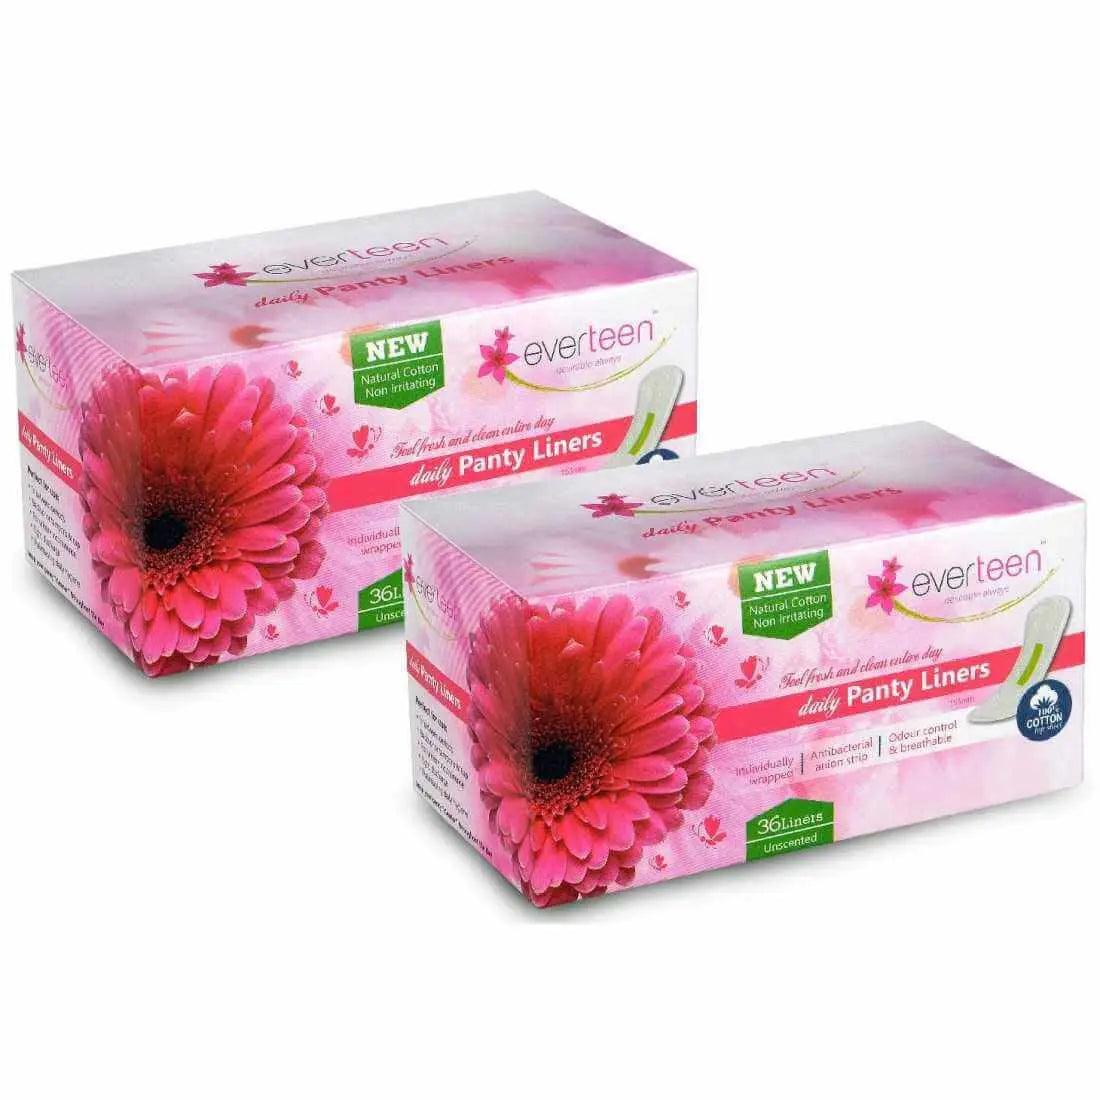 everteen Natural Cotton Daily Panty Liners for Women 8908003648217